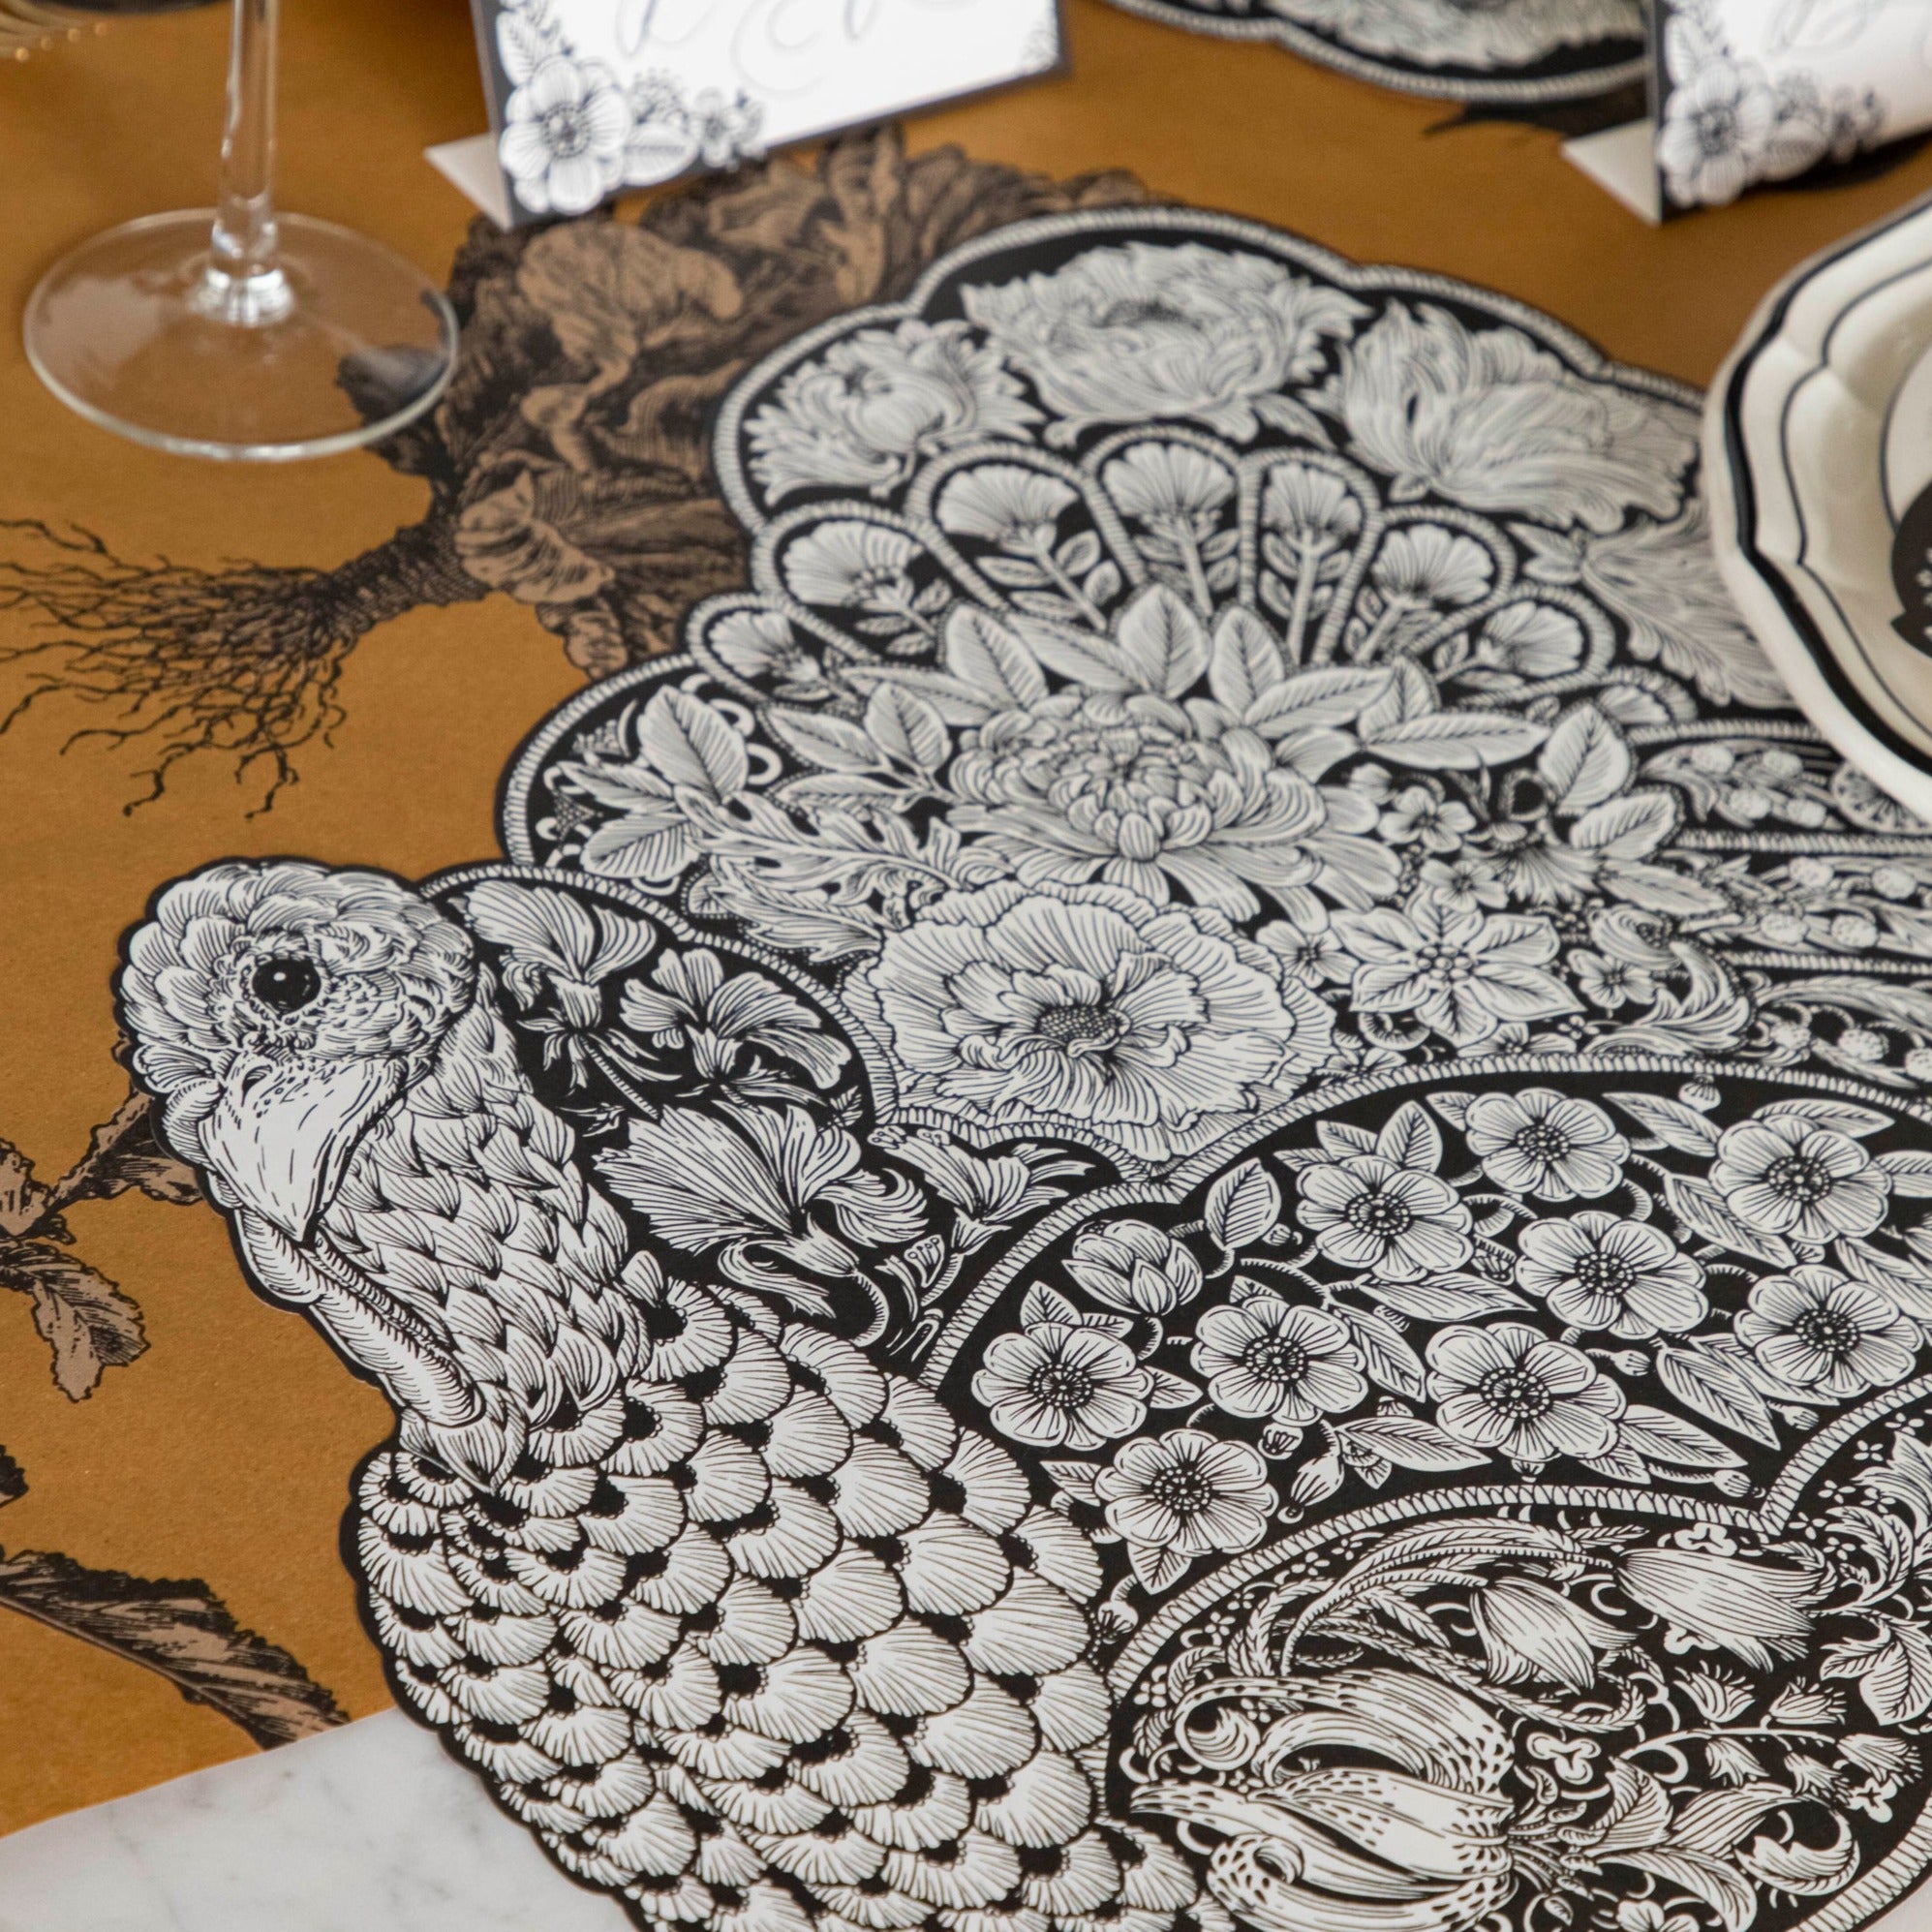 A Hester &amp; Cook die-cut Ebony Harvest Turkey Placemat on a black and white tablecloth, perfect for Thanksgiving and autumnal settings.